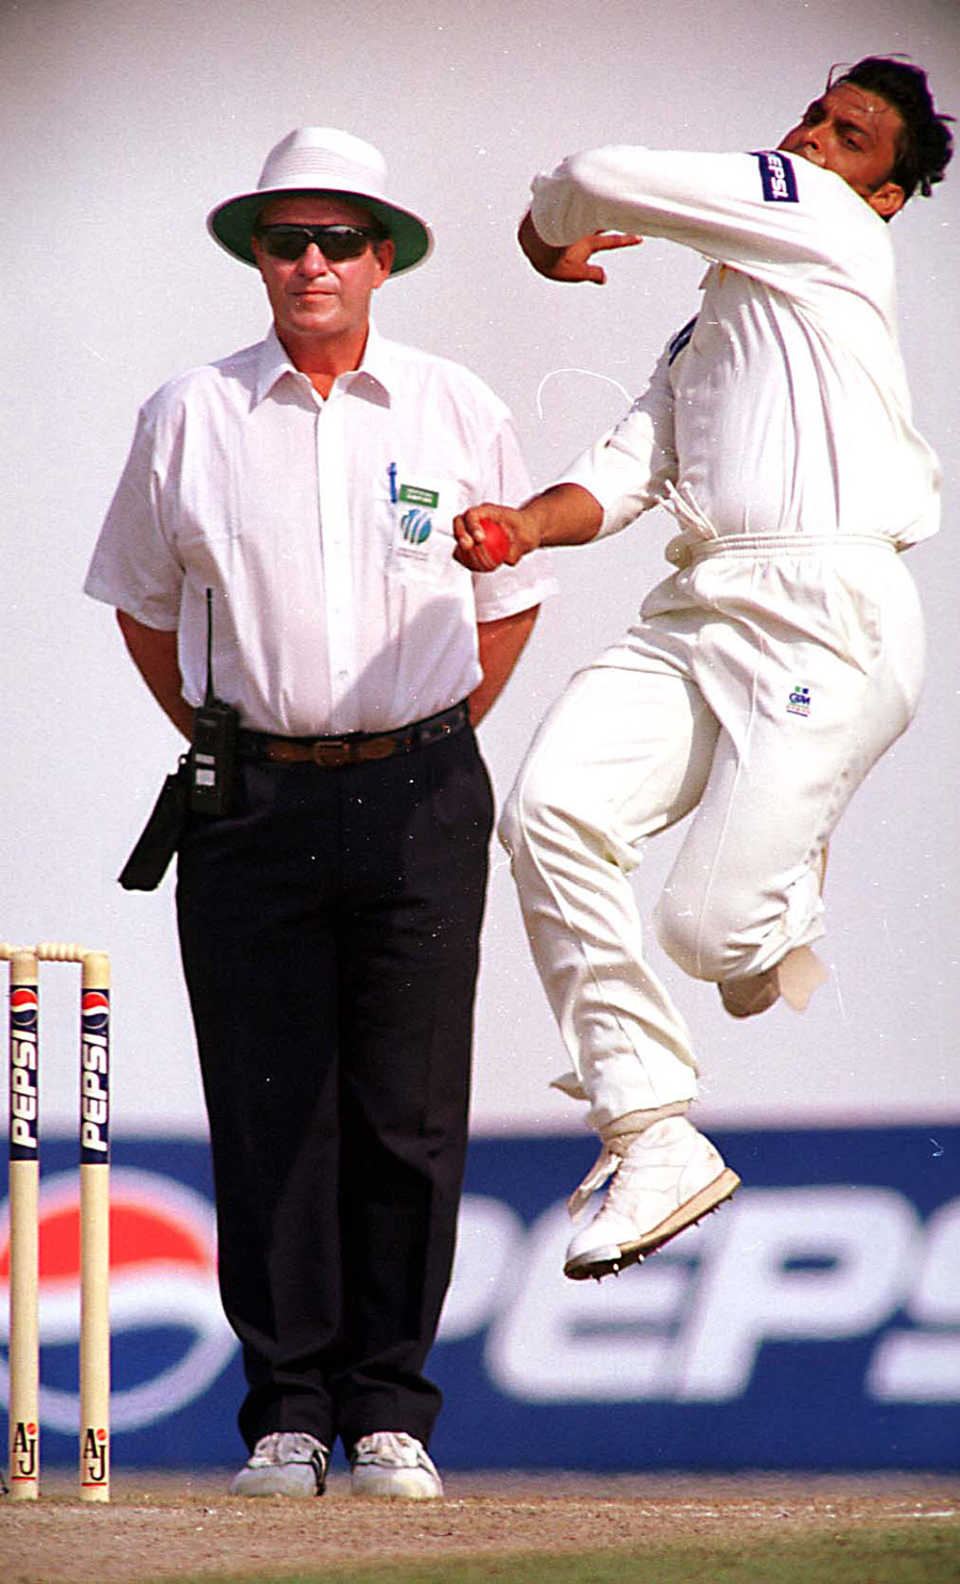 Shoaib Akhtar runs in during the course of his ten-wicket match haul